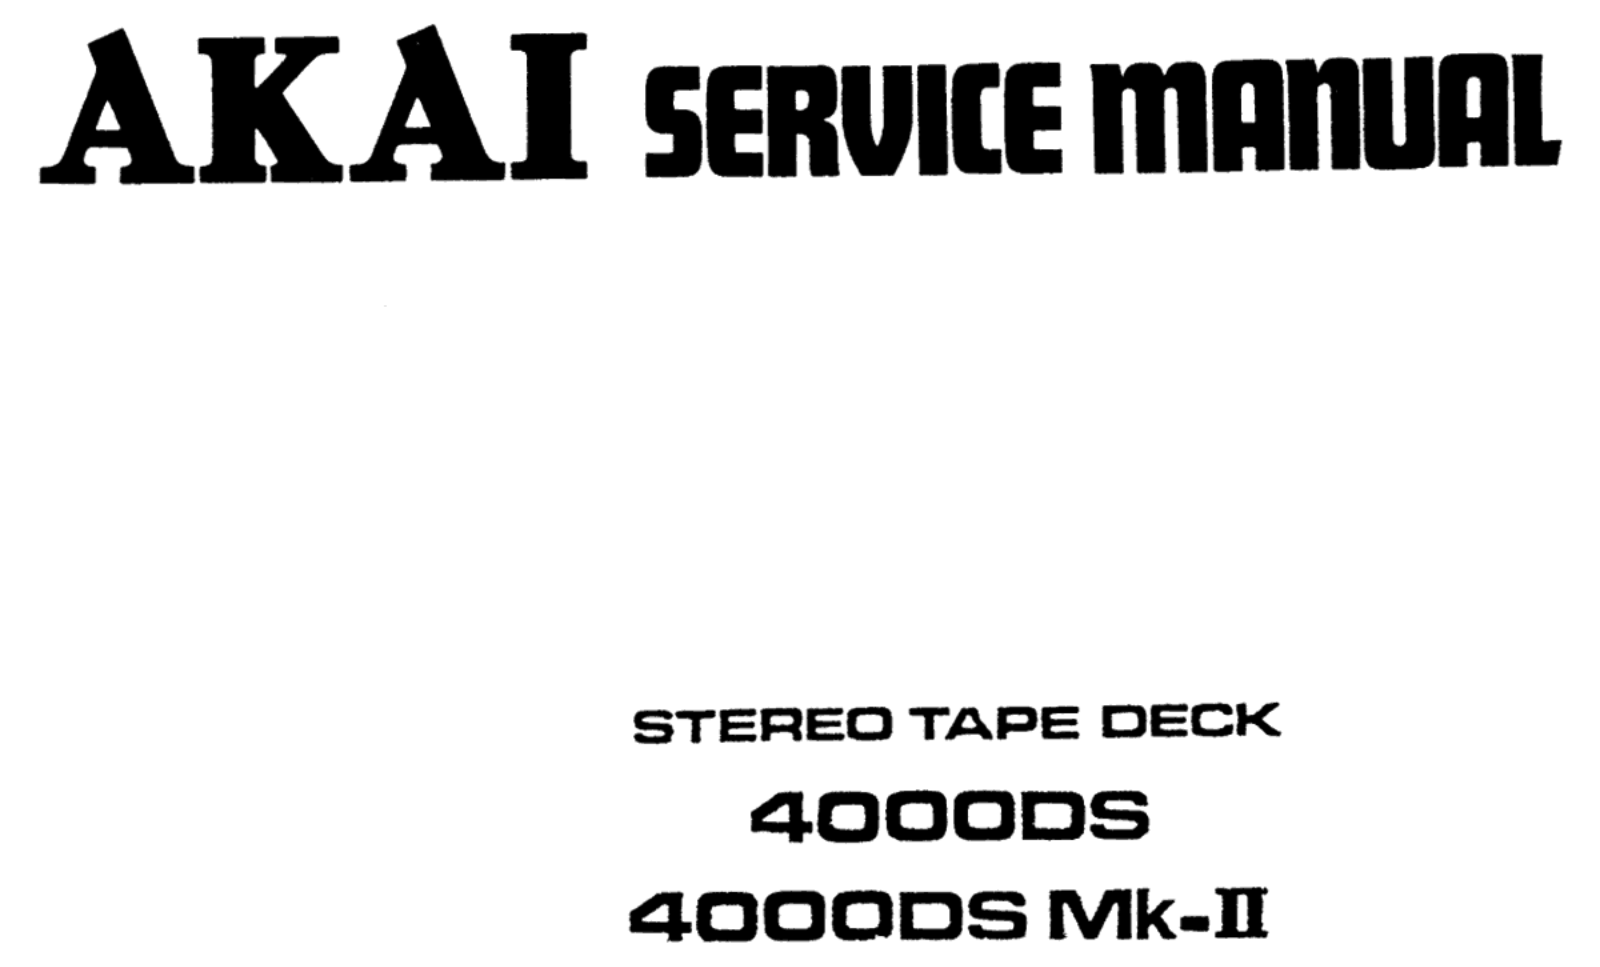 Akai 4000DS, 4000DS MKII Service Manual